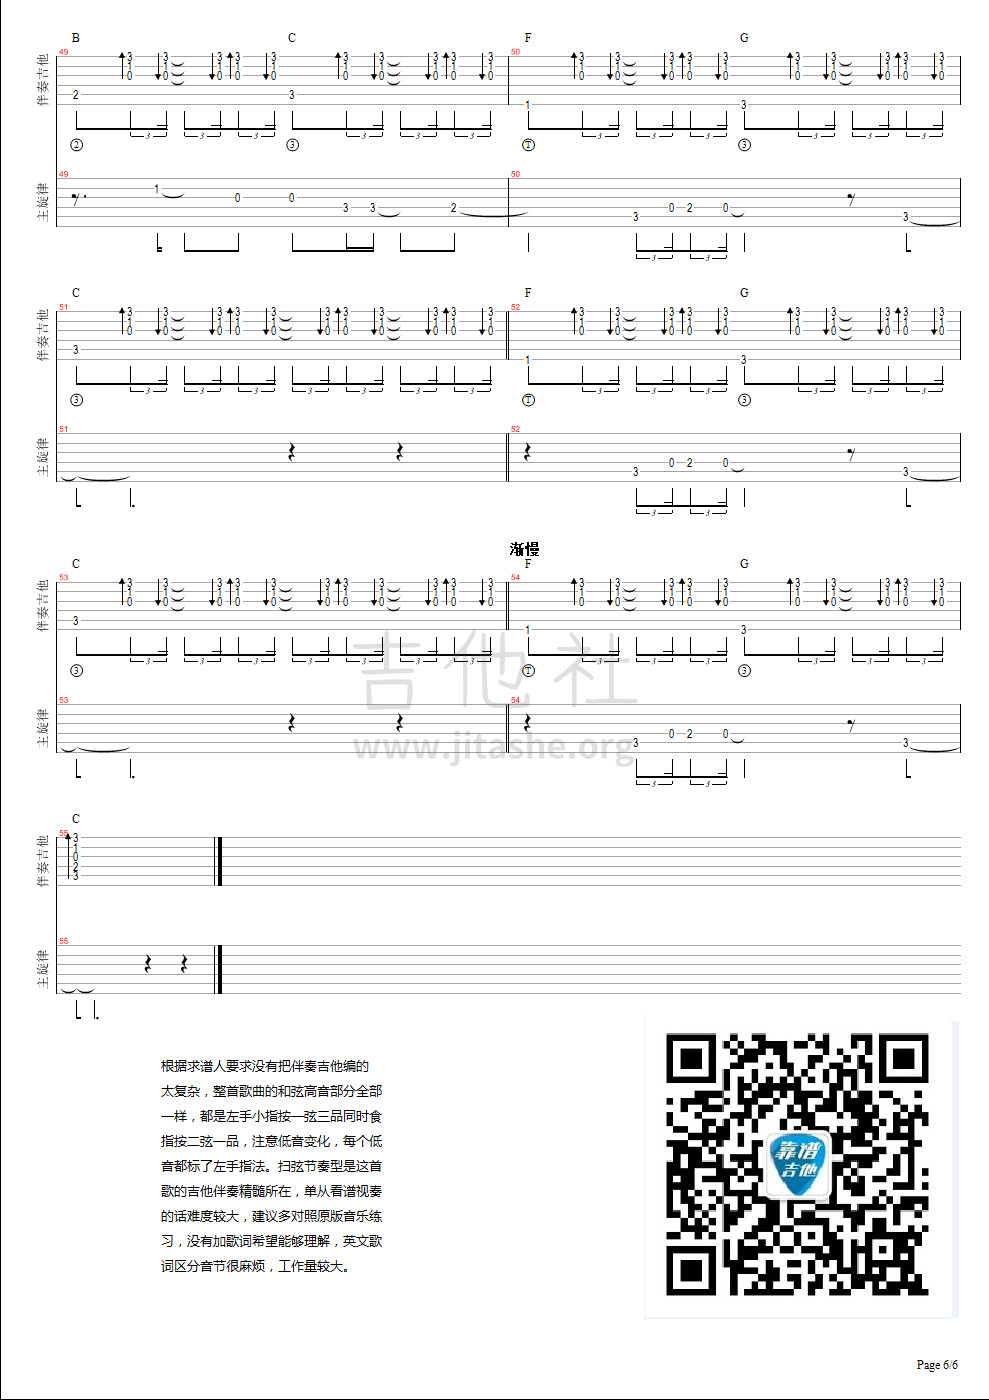 Golden Love吉他谱(图片谱)_Midnight Youth_golden love - page 6.bmp